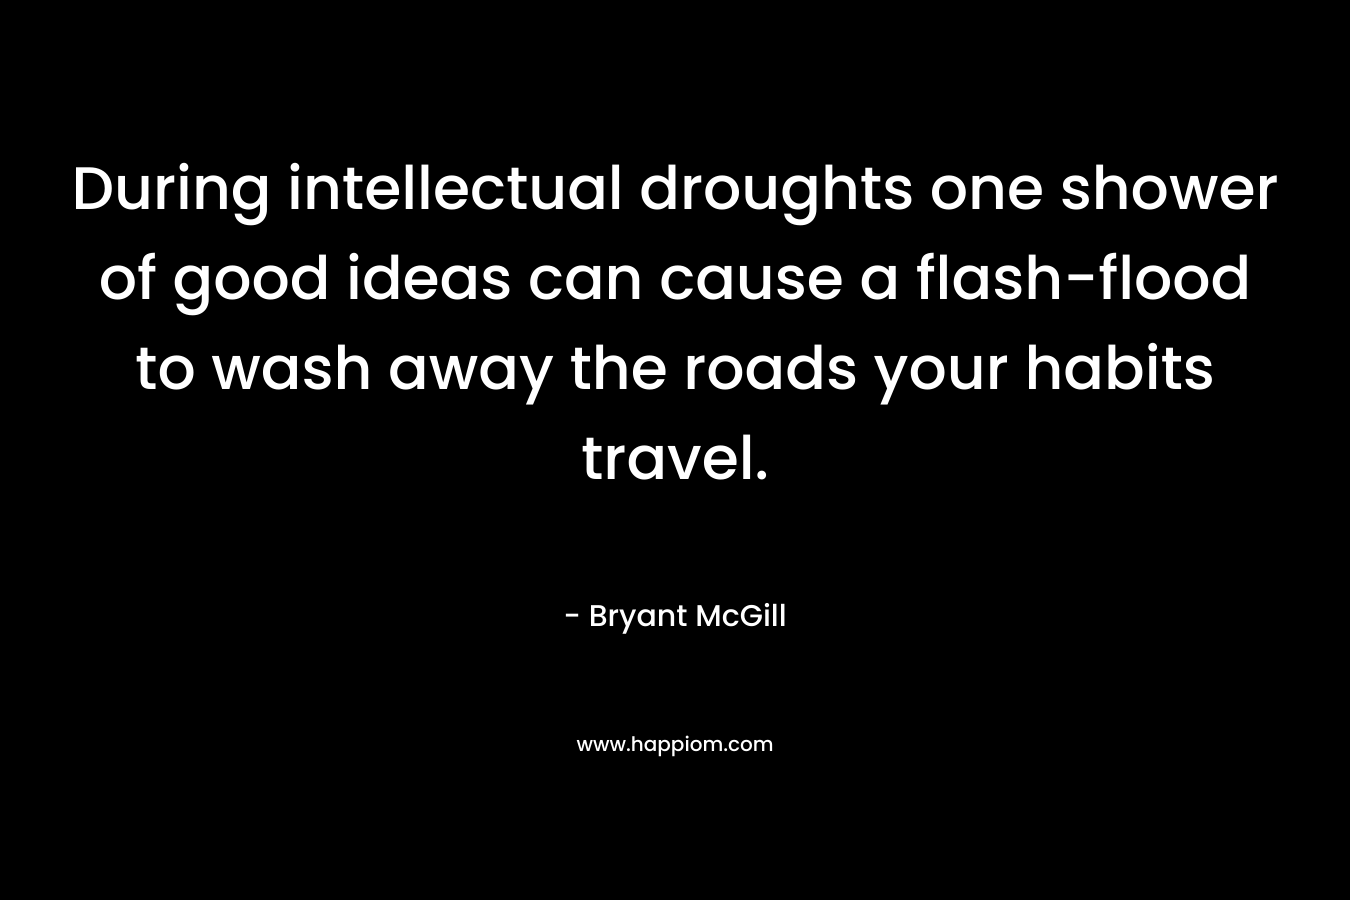 During intellectual droughts one shower of good ideas can cause a flash-flood to wash away the roads your habits travel. – Bryant McGill